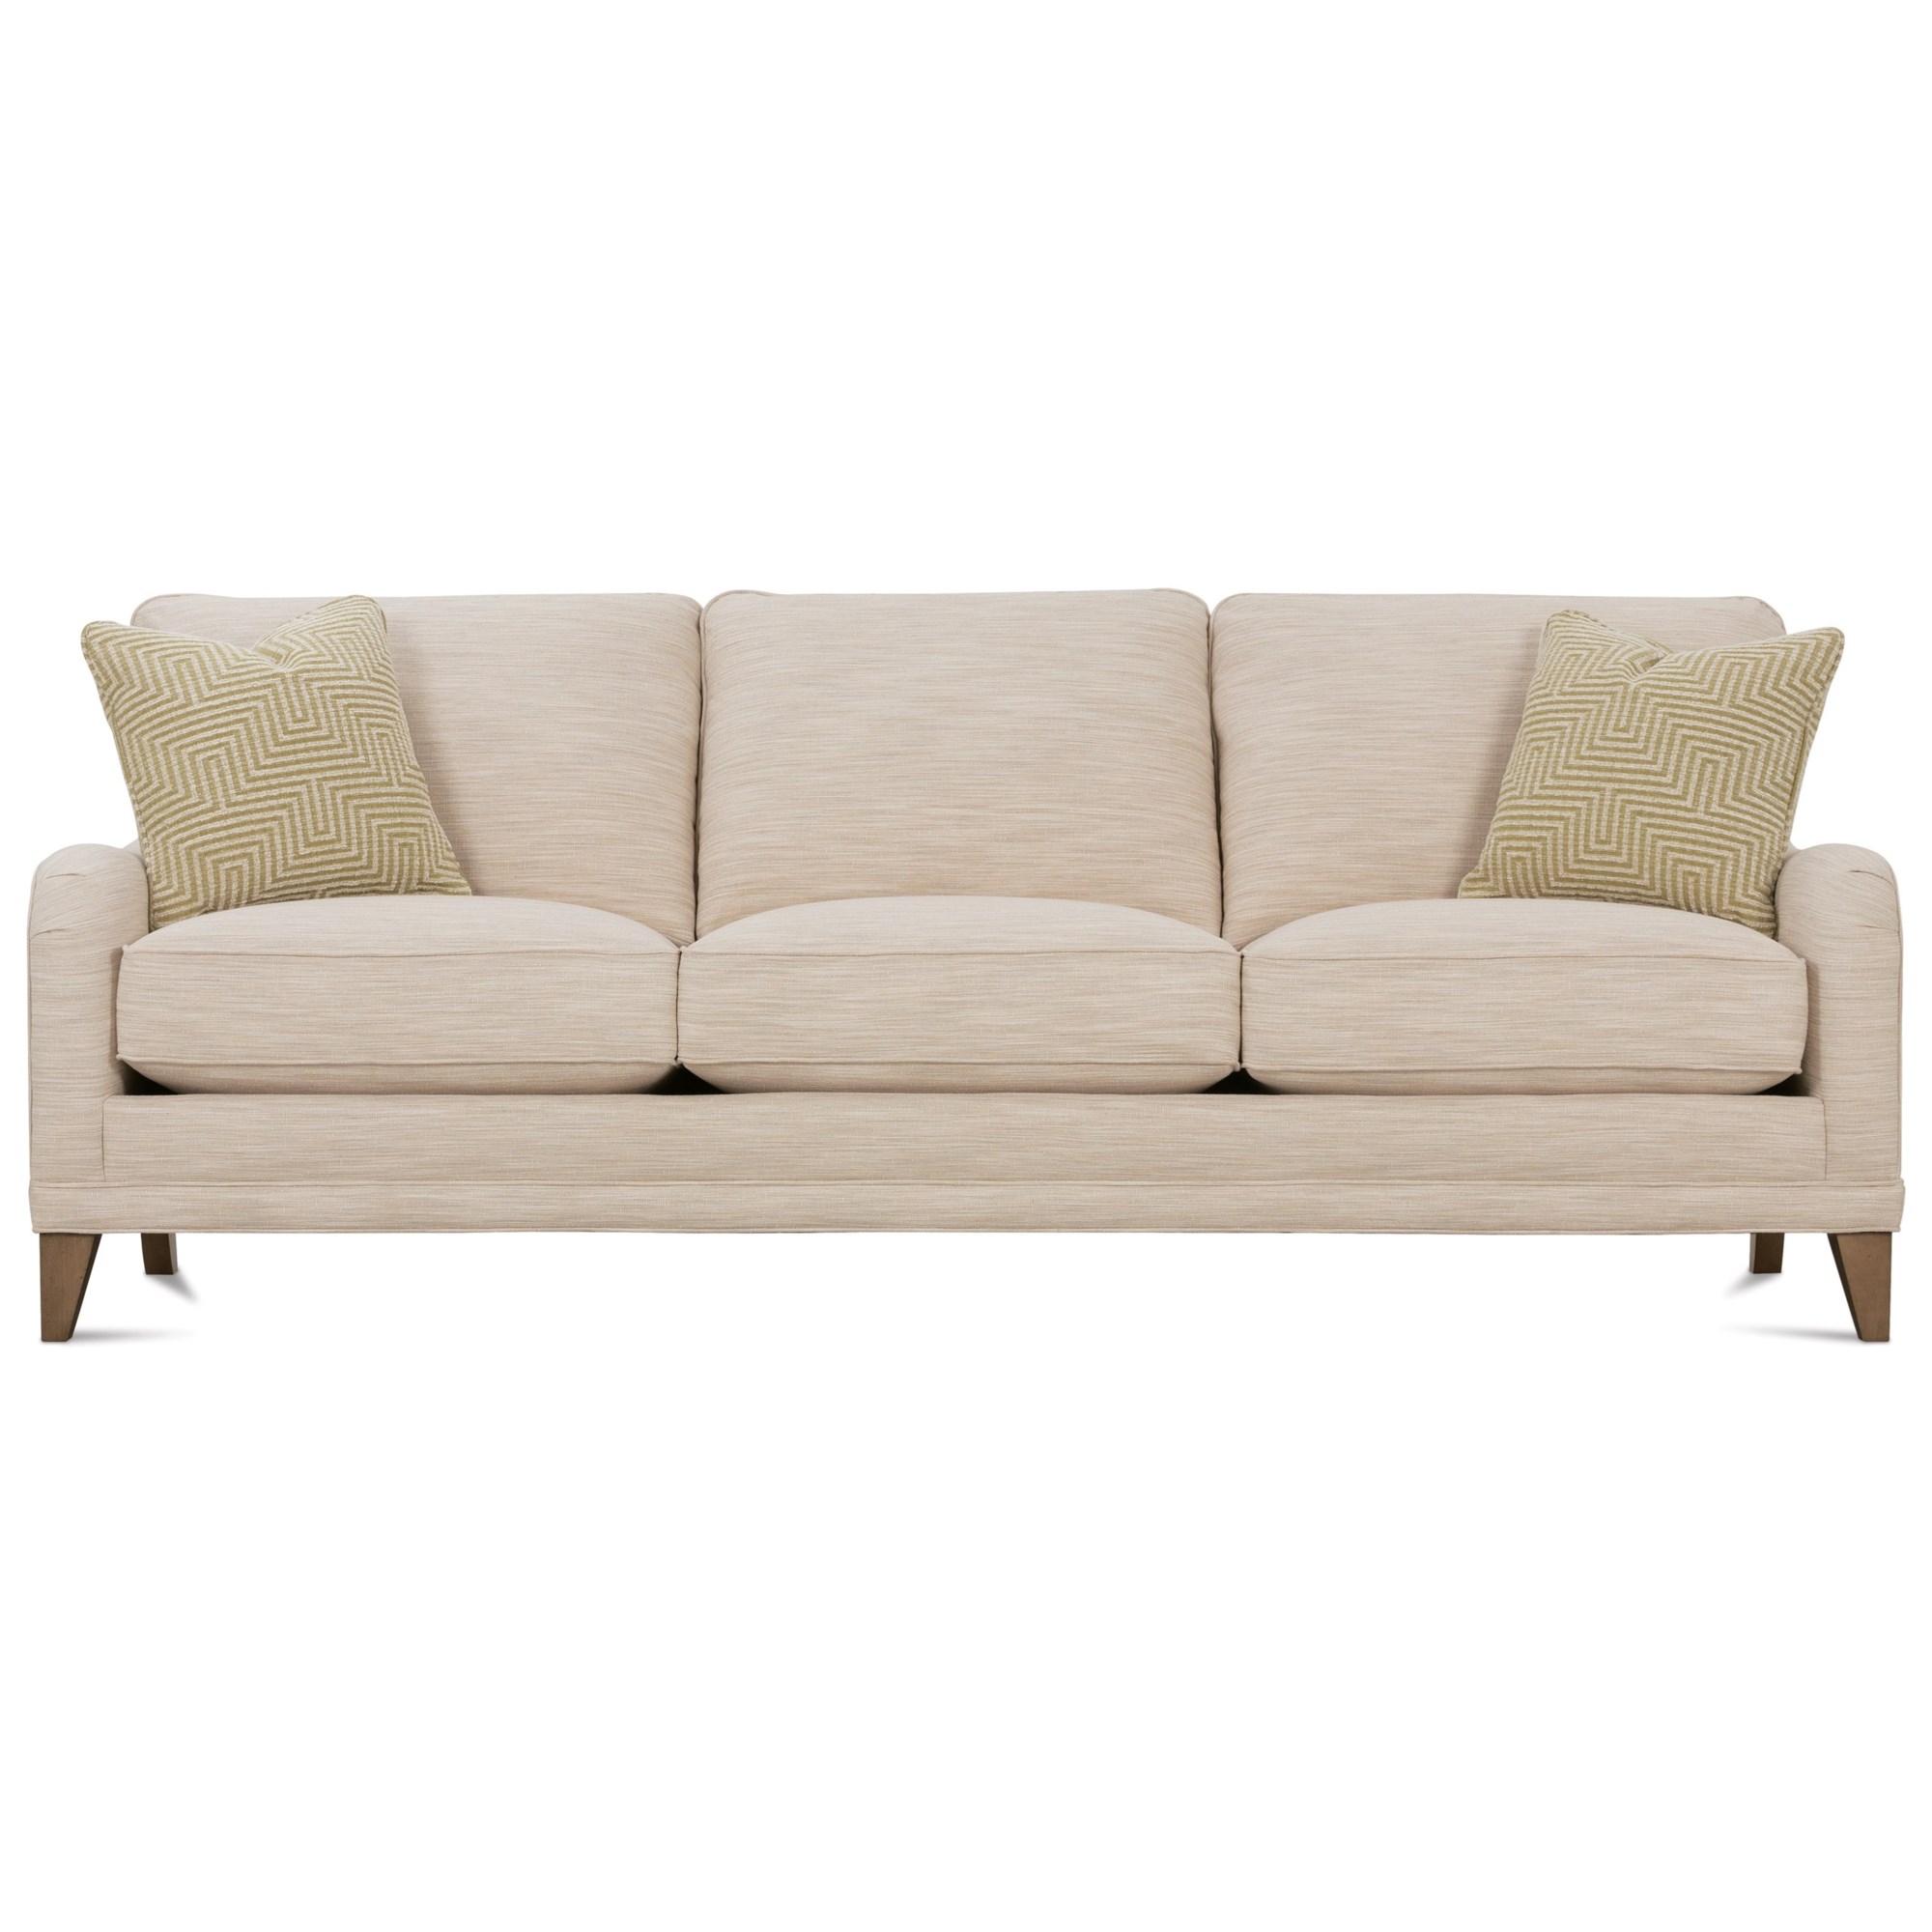 Rowe Townsend Customizable 3-Cushion Sofa with Track Arms & Wood